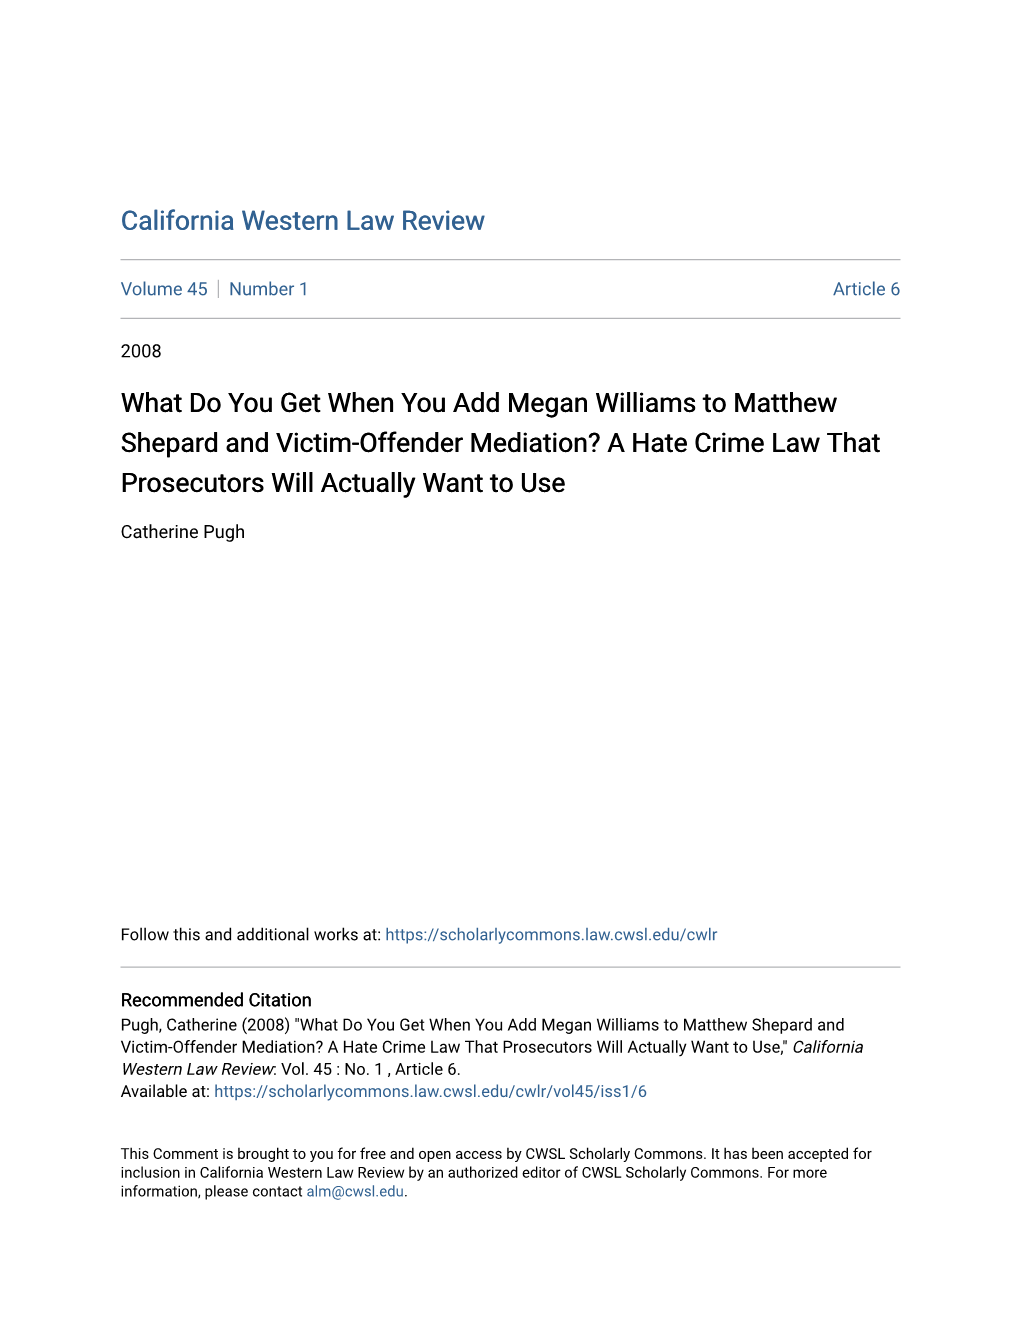 What Do You Get When You Add Megan Williams to Matthew Shepard and Victim-Offender Mediation? a Hate Crime Law That Prosecutors Will Actually Want to Use